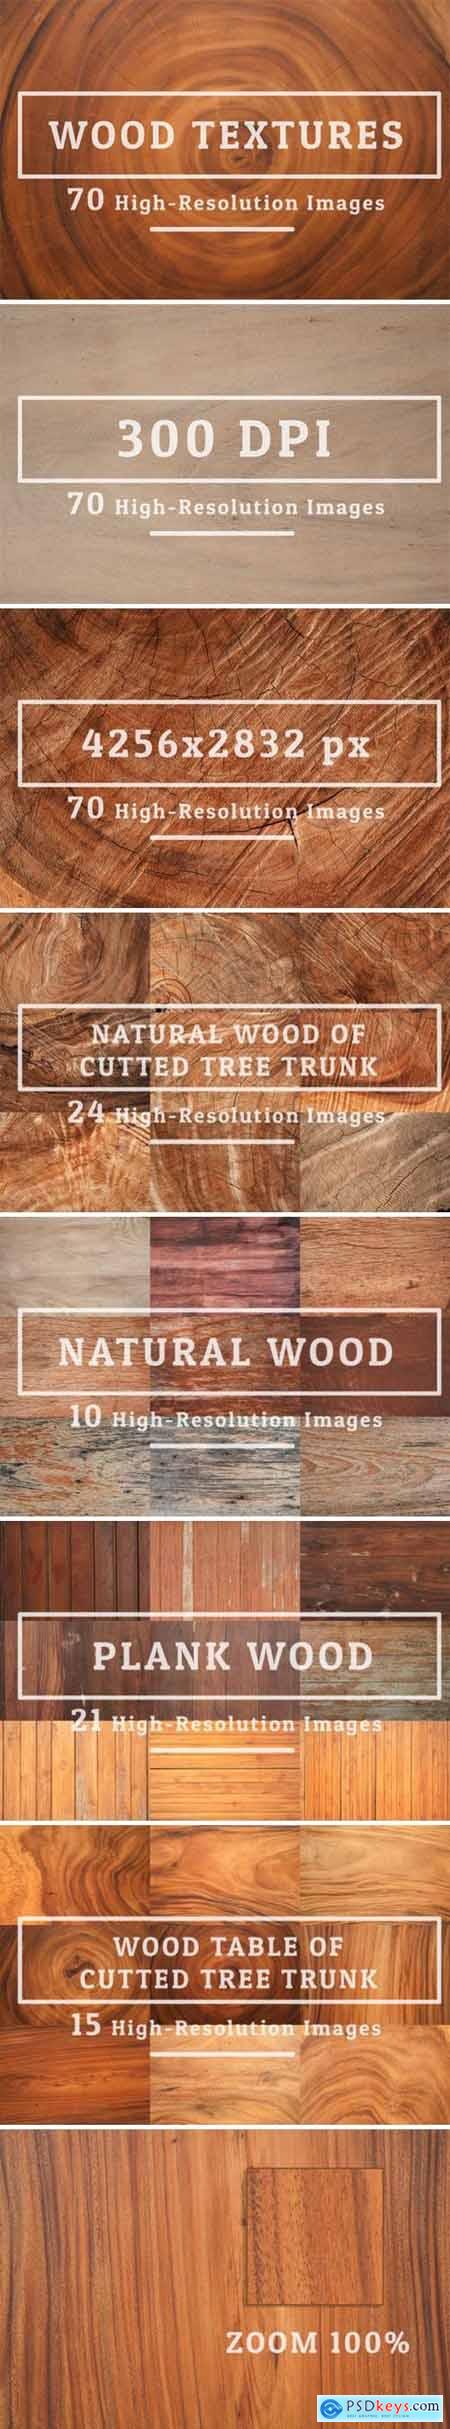 70 Wood Texture Background 4317539